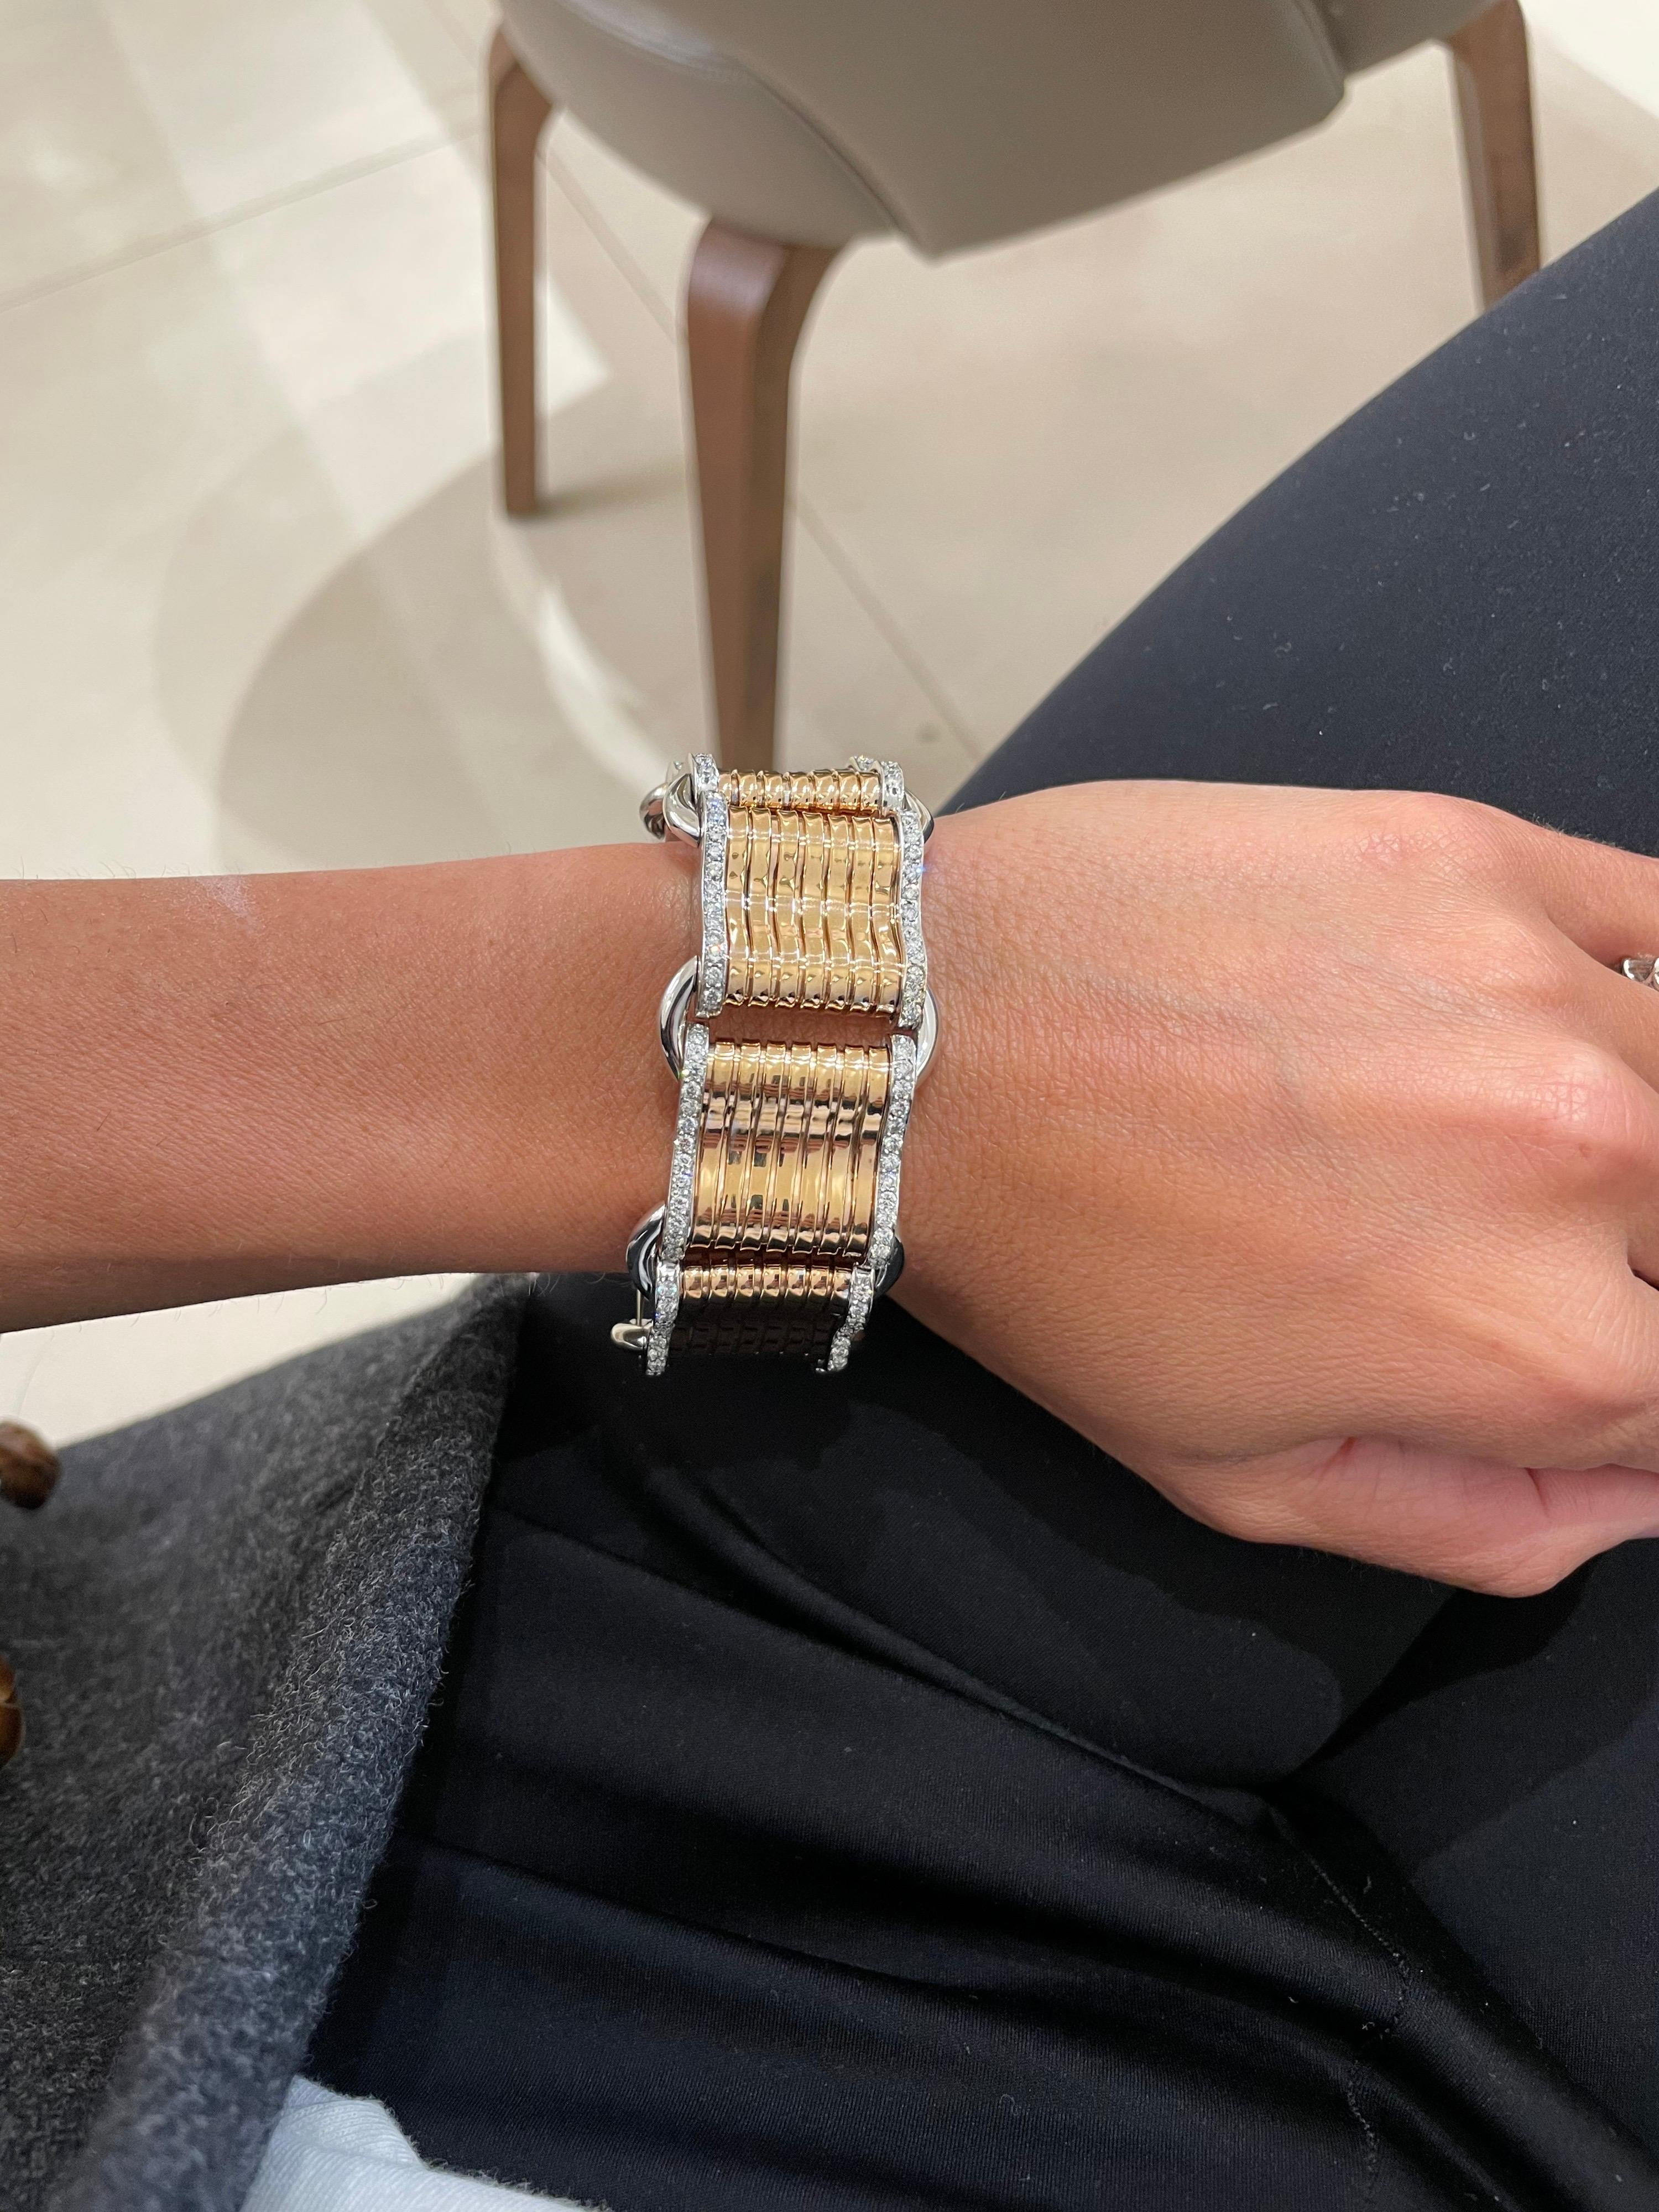 WEINGRILL is today an expression of the Weingrill Family which, from 1879, is following the tradition of artisanal production of a very high quality goldsmith.
The Sahara bracelet is designed in 18 karat rose and white gold with 4.82 carats of